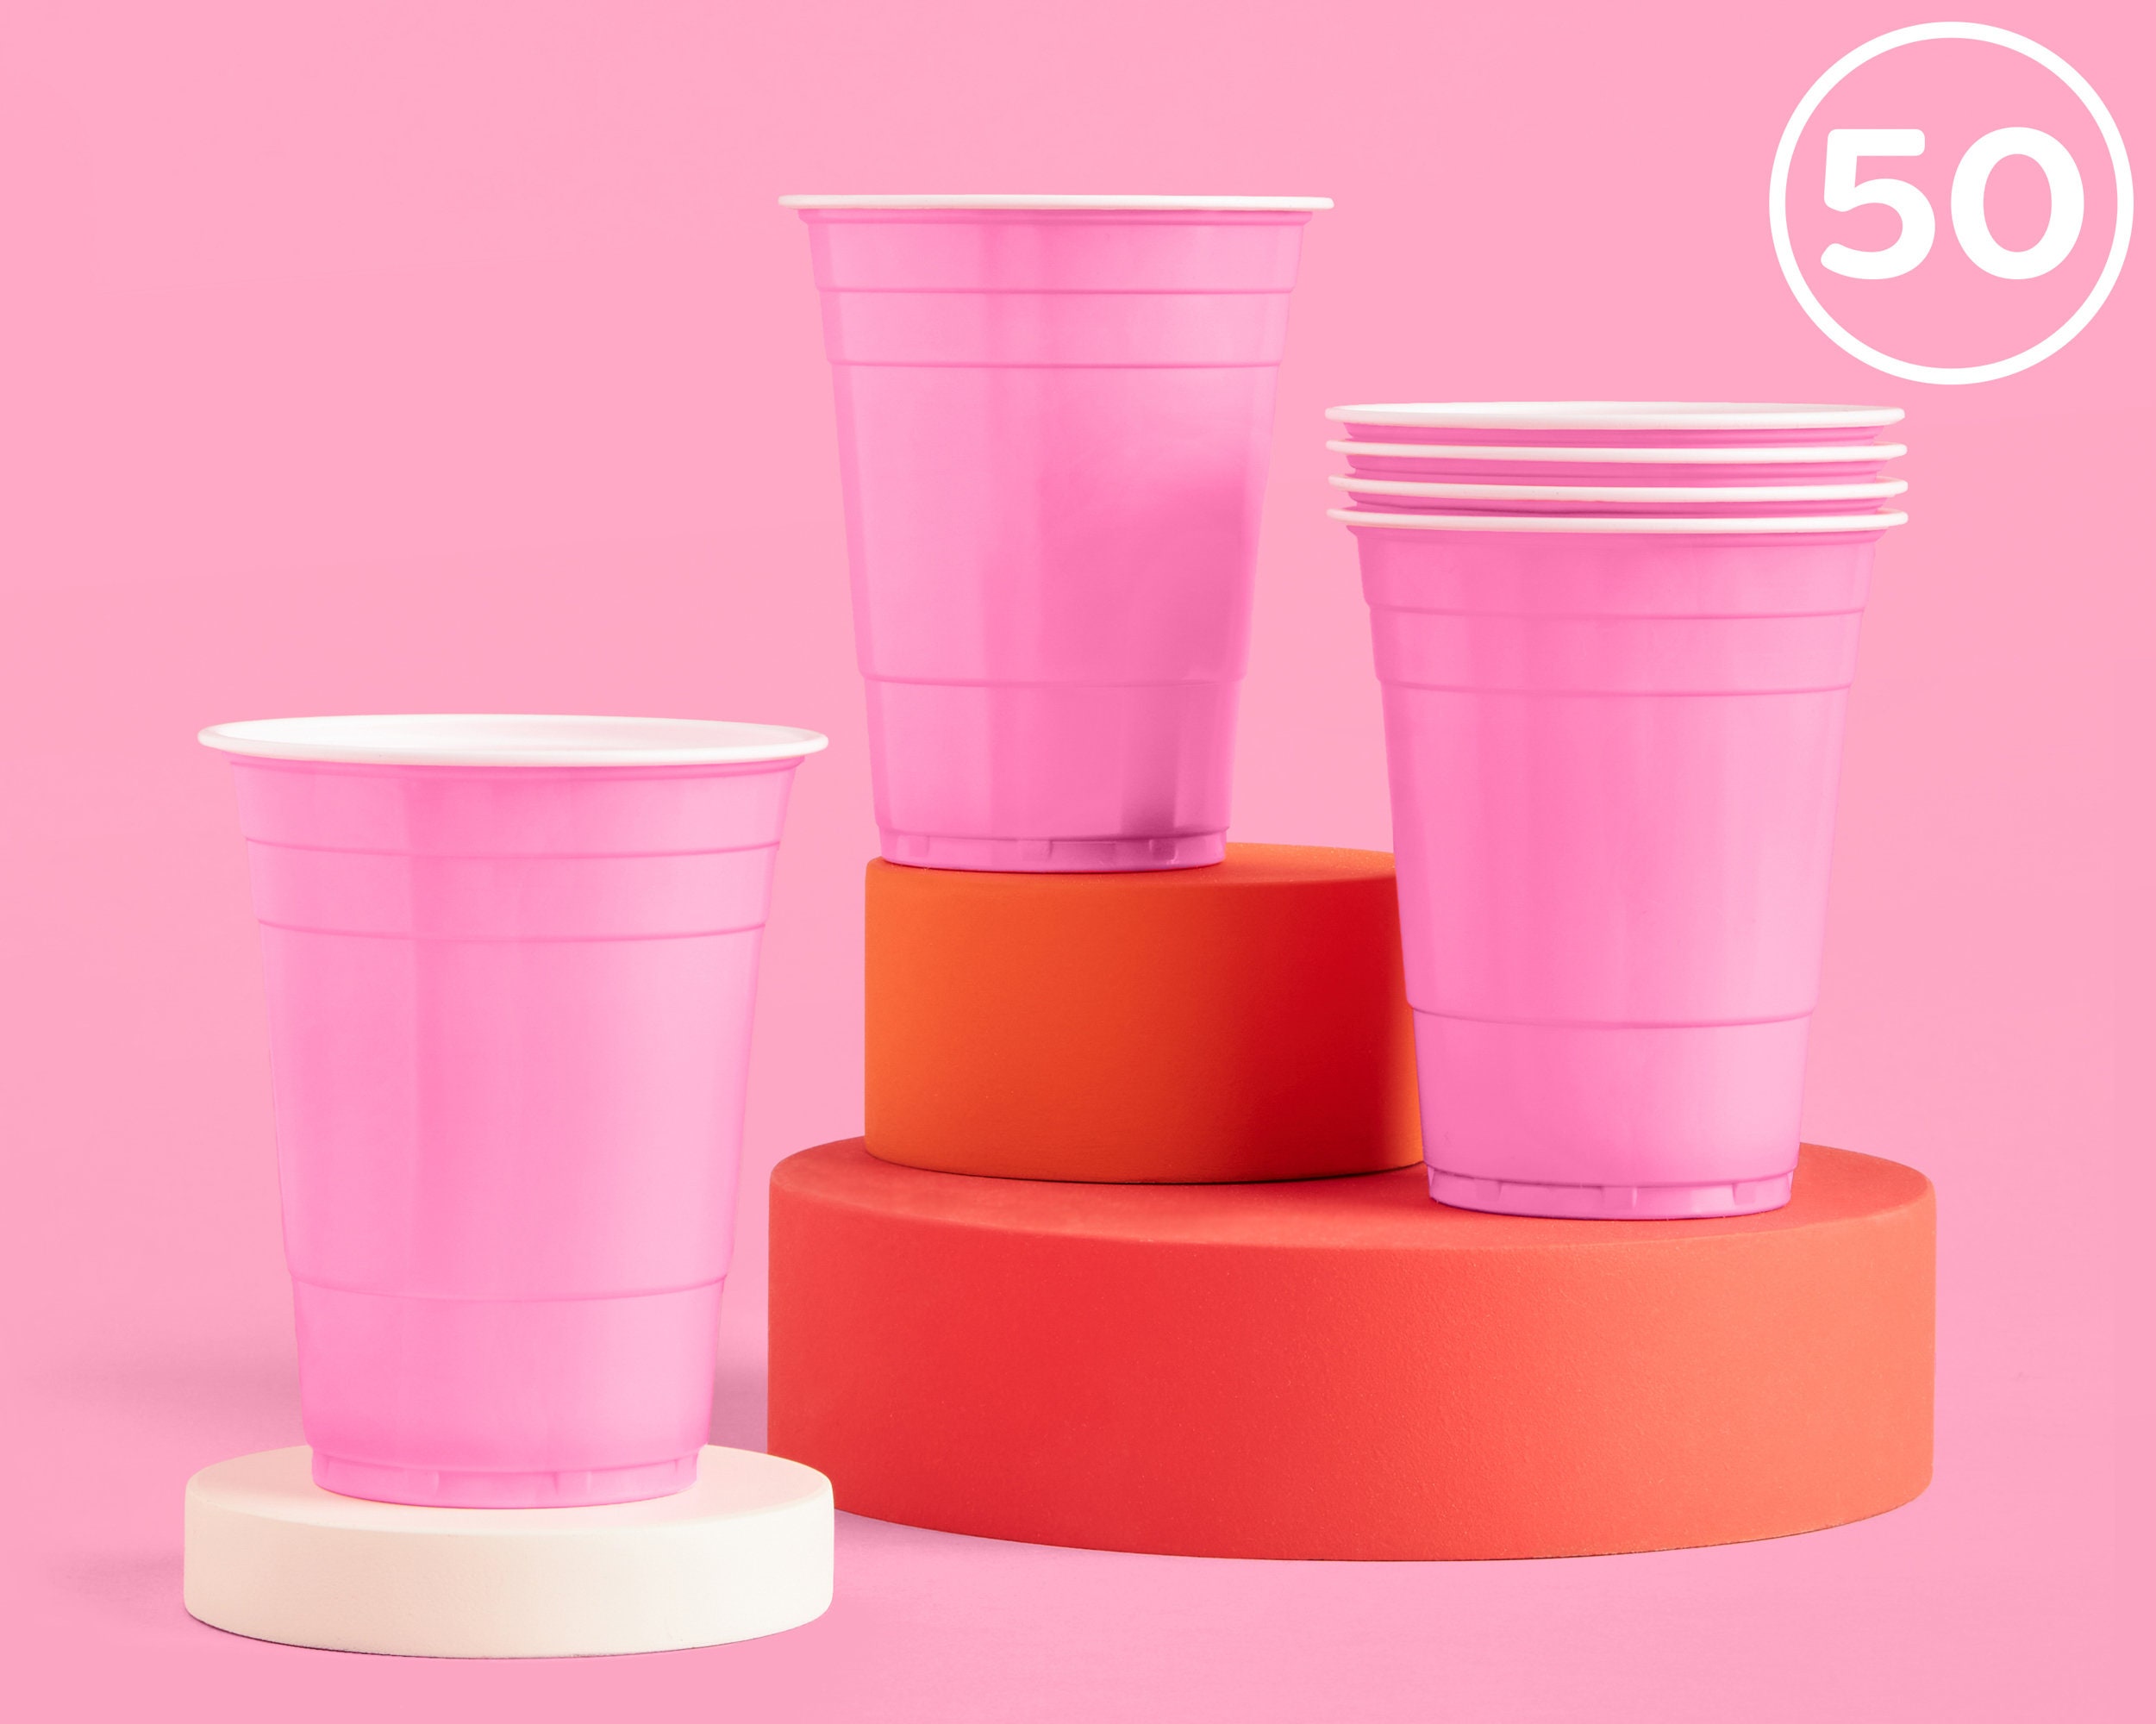 Reusable Plastic Cups: Party cups that you never throw away.